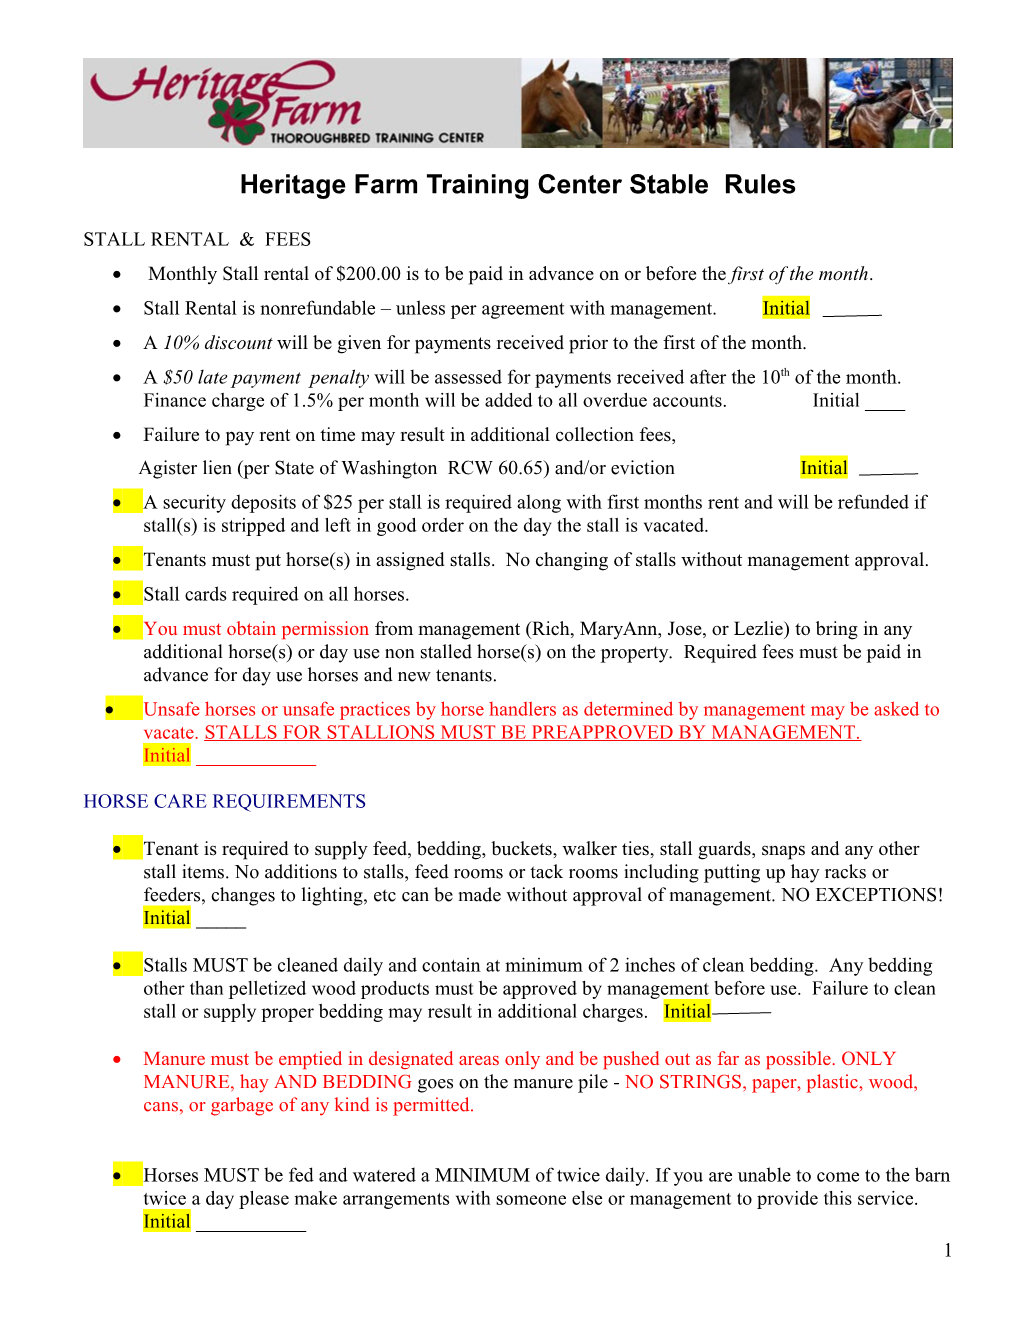 Heritage Farm Training Center Stable Rules